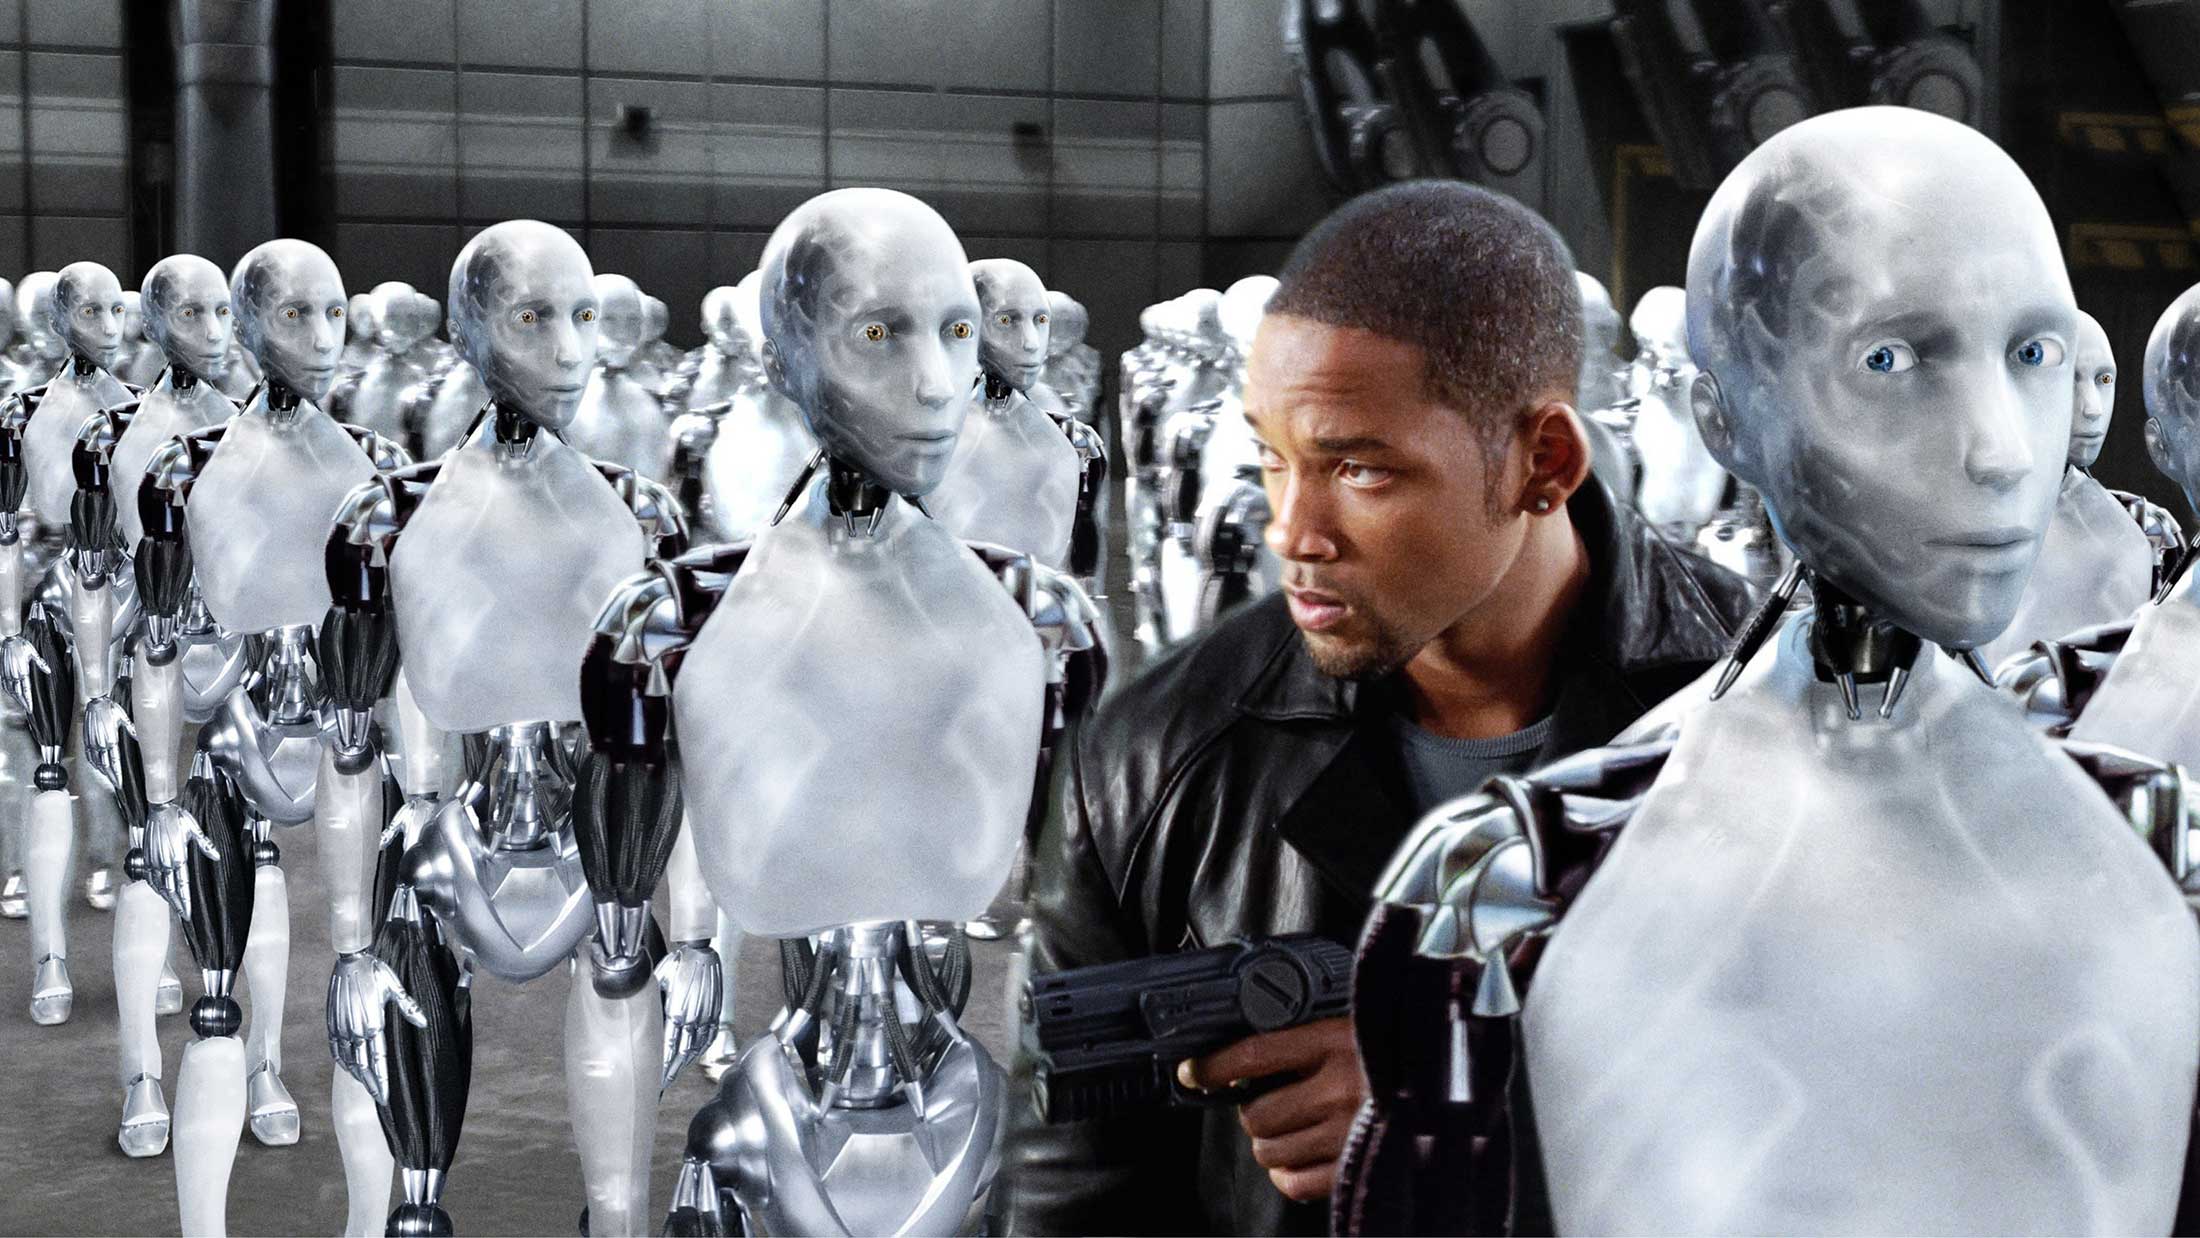 Will Smith suspiciously weaves his way through an army of AI robots, from the movie I-Robot